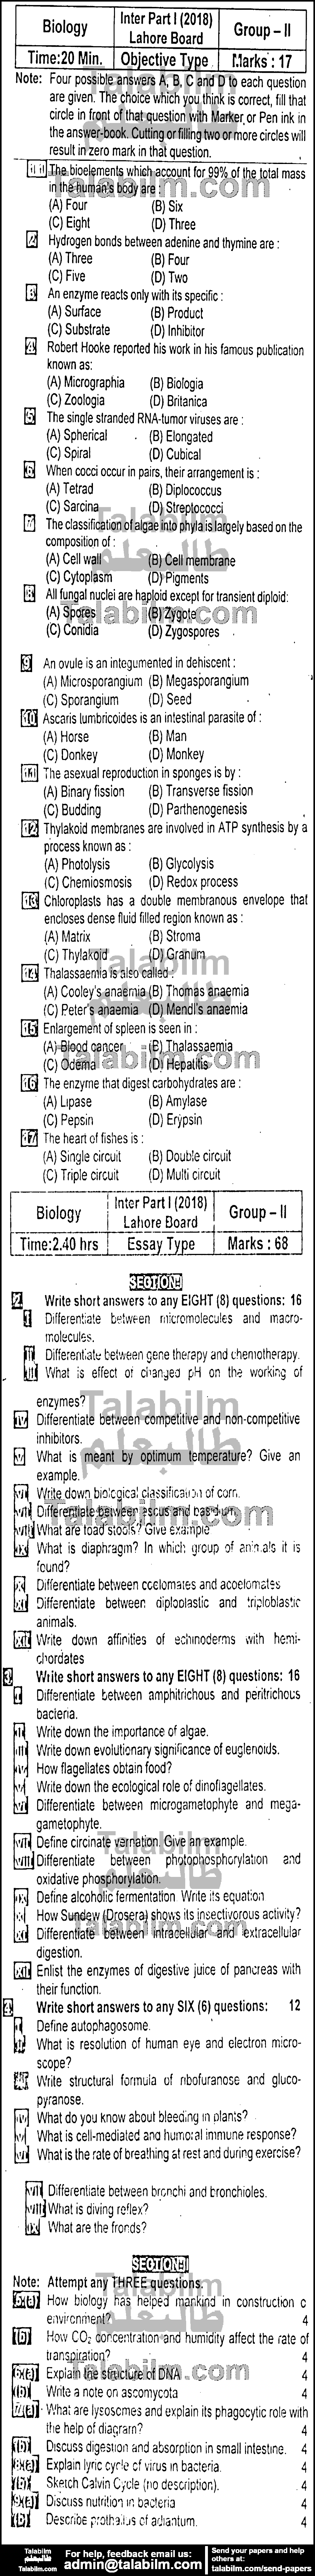 Biology 0 past paper for Group-II 2018